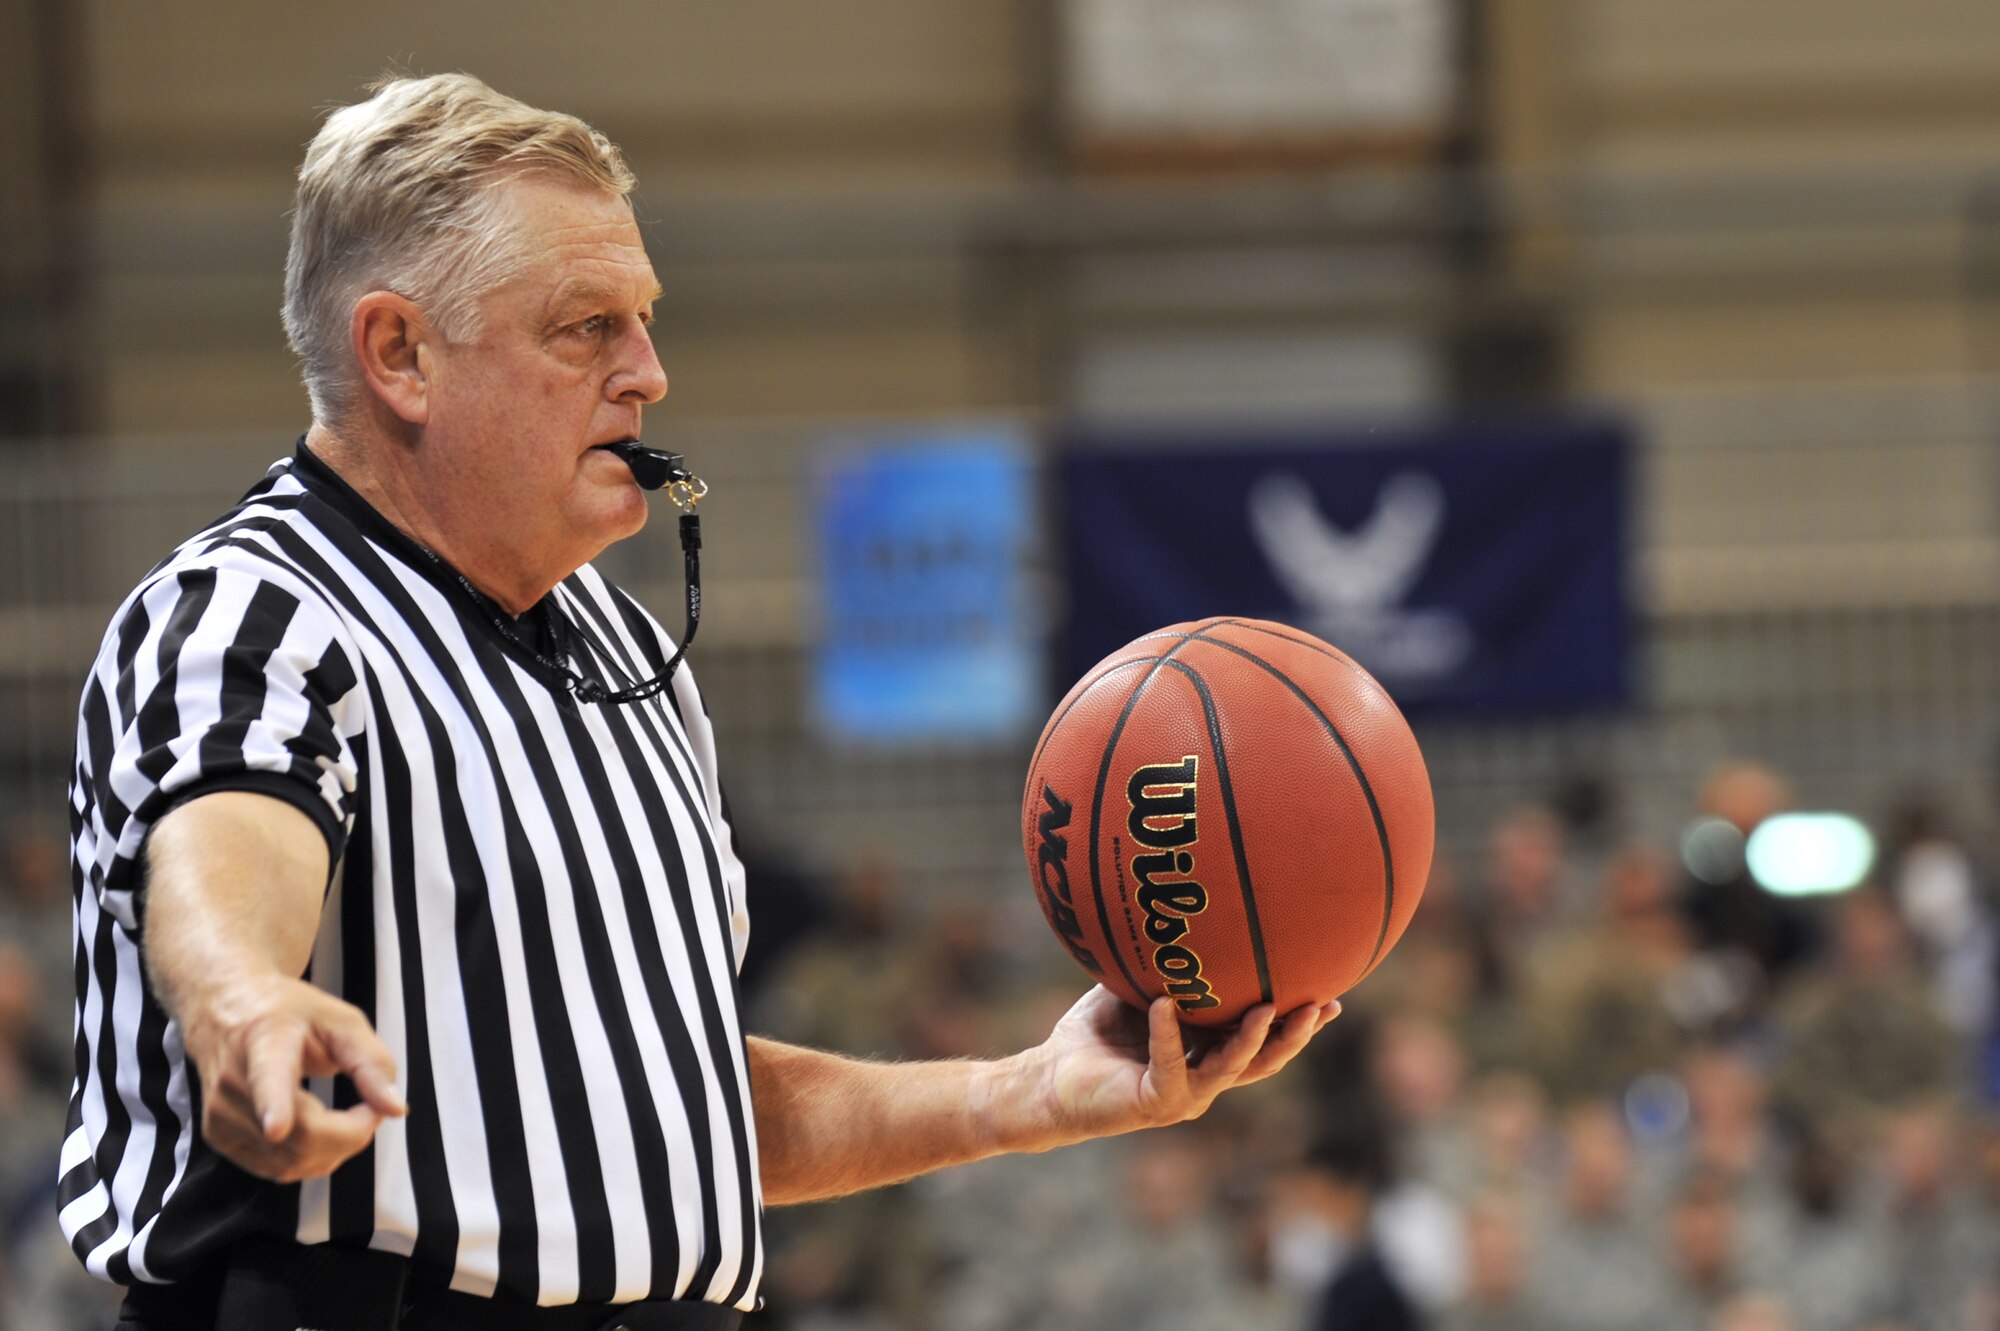 Official Jim Burr makes a call during the 2012 Armed Forces Classic on Ramstein Air Base, Germany, Nov. 10, 2012. The match-up between Michigan State and the University of Connecticut is part of ESPN's Veteran's week initiative to honor the men and women who have served and are still serving in the U.S. military. (U.S. Air Force photo/Senior Airman Caitlin O’Neil-McKeown)